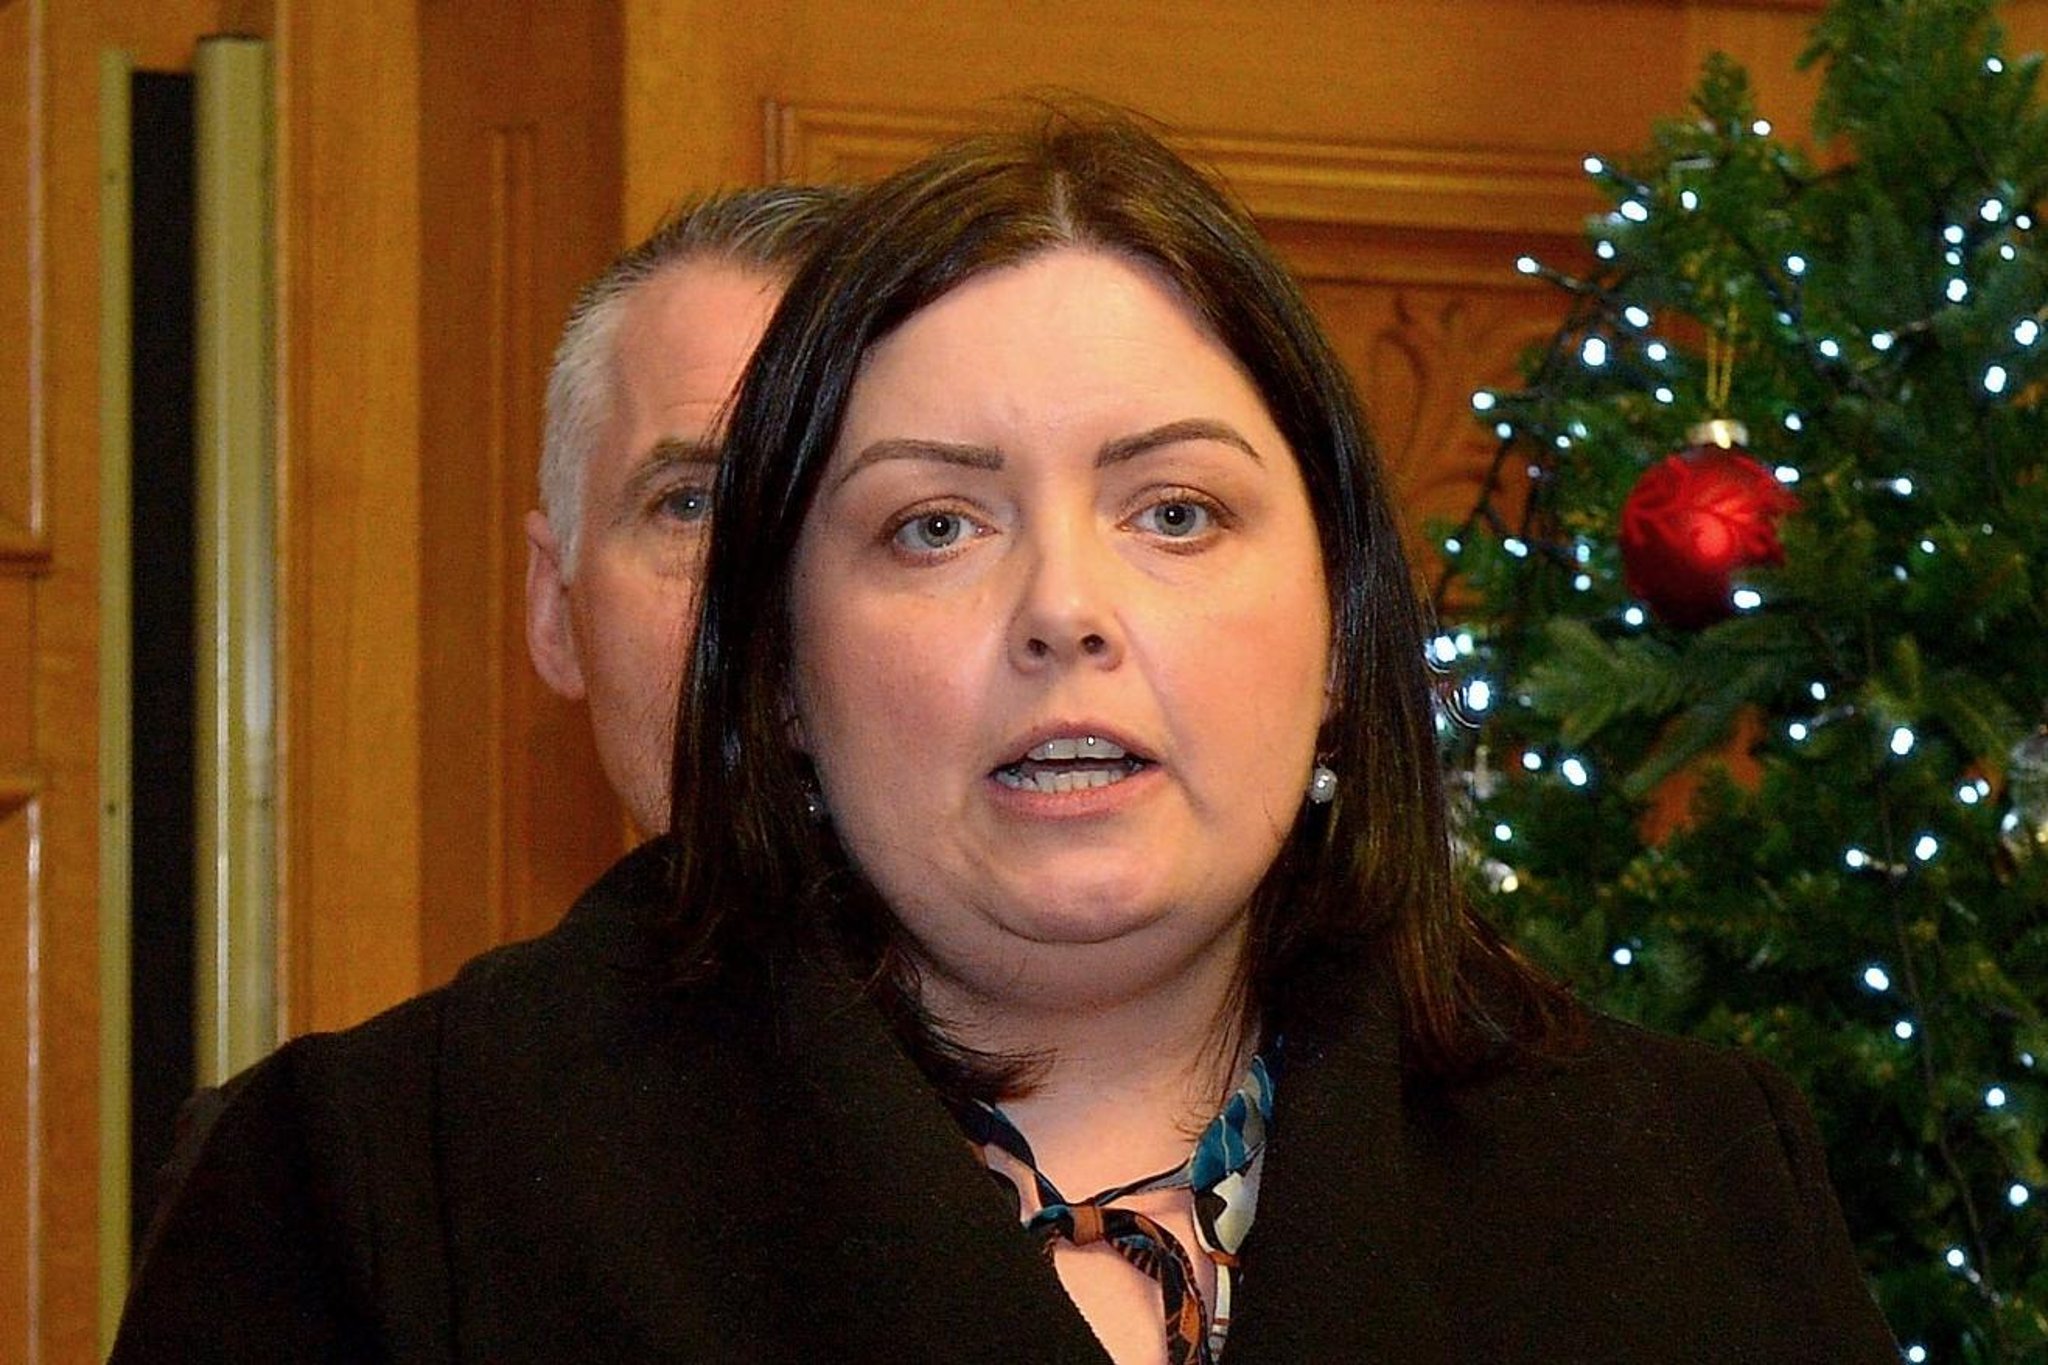 Sinn Fein minister expresses hopes of 'unlocking' funding amid sports controversy